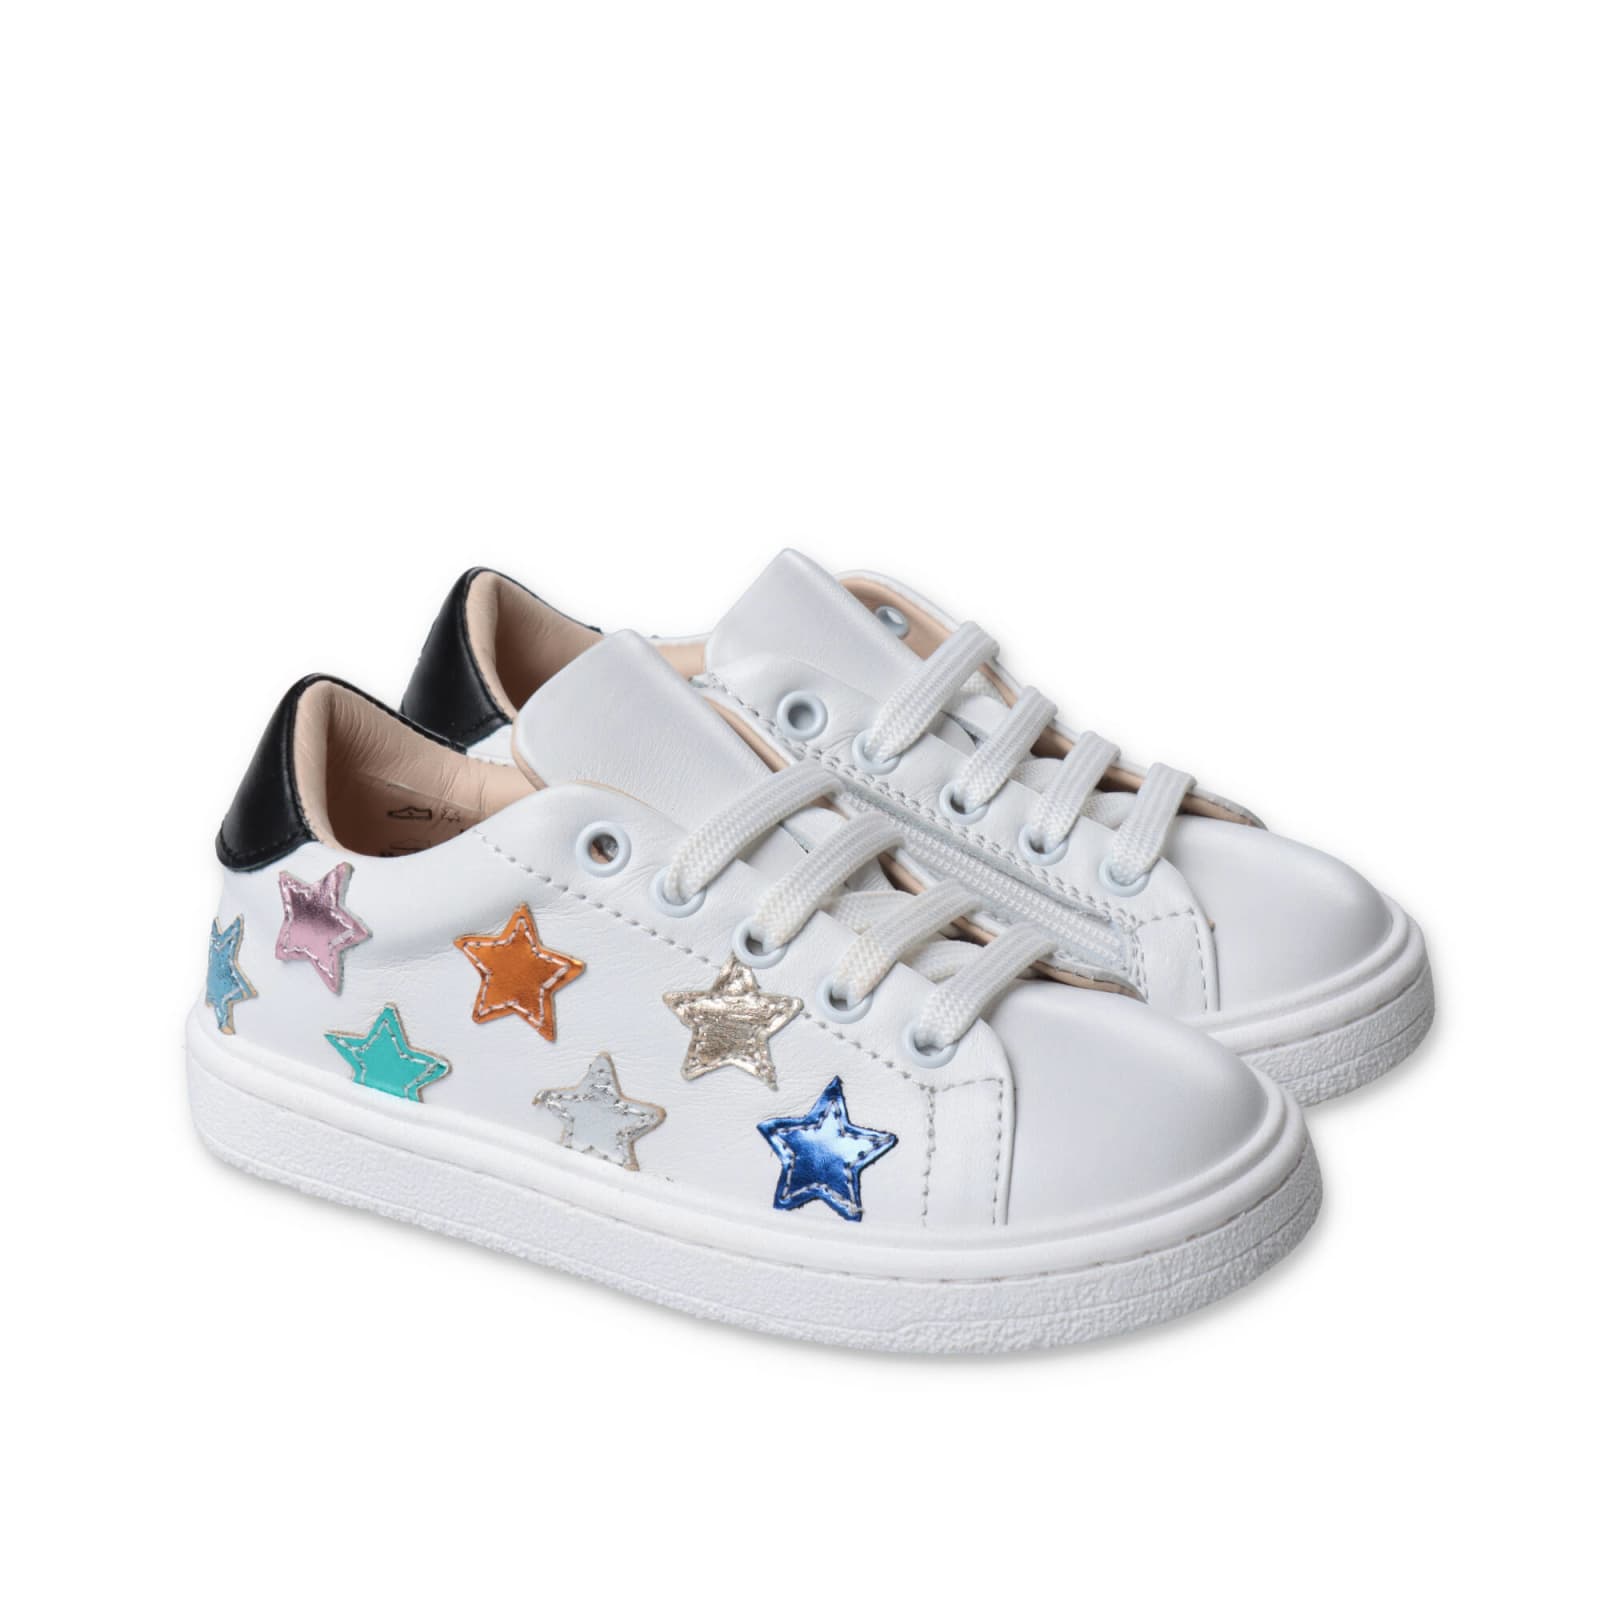 FLORENS FLORENS SNEAKERS BIANCHE IN PELLE CON LACCI BAMBINA